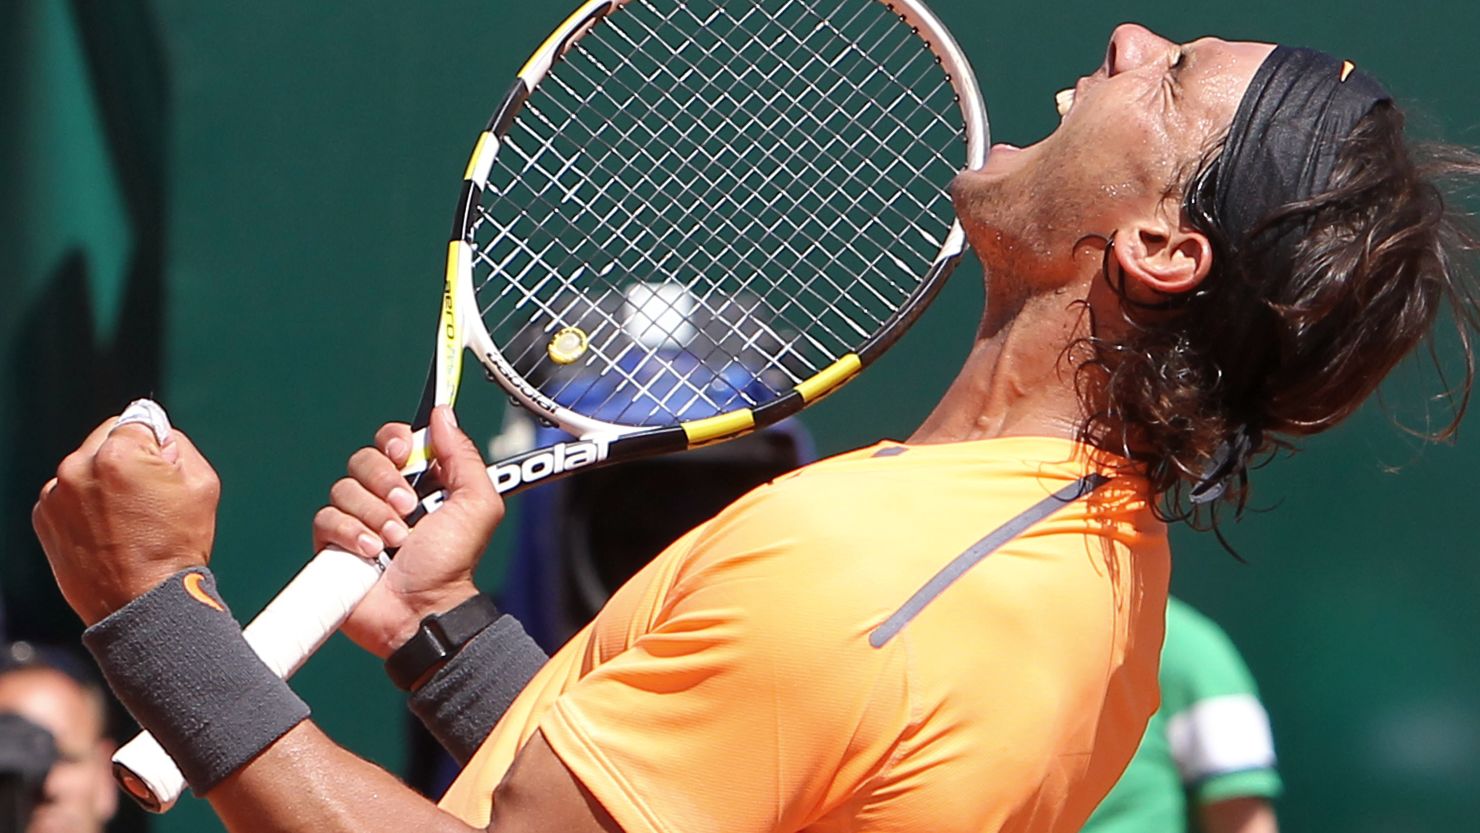 Rafael Nadal celebrates in typical style after beating Novak Djokovic in the Monte Carlo final.